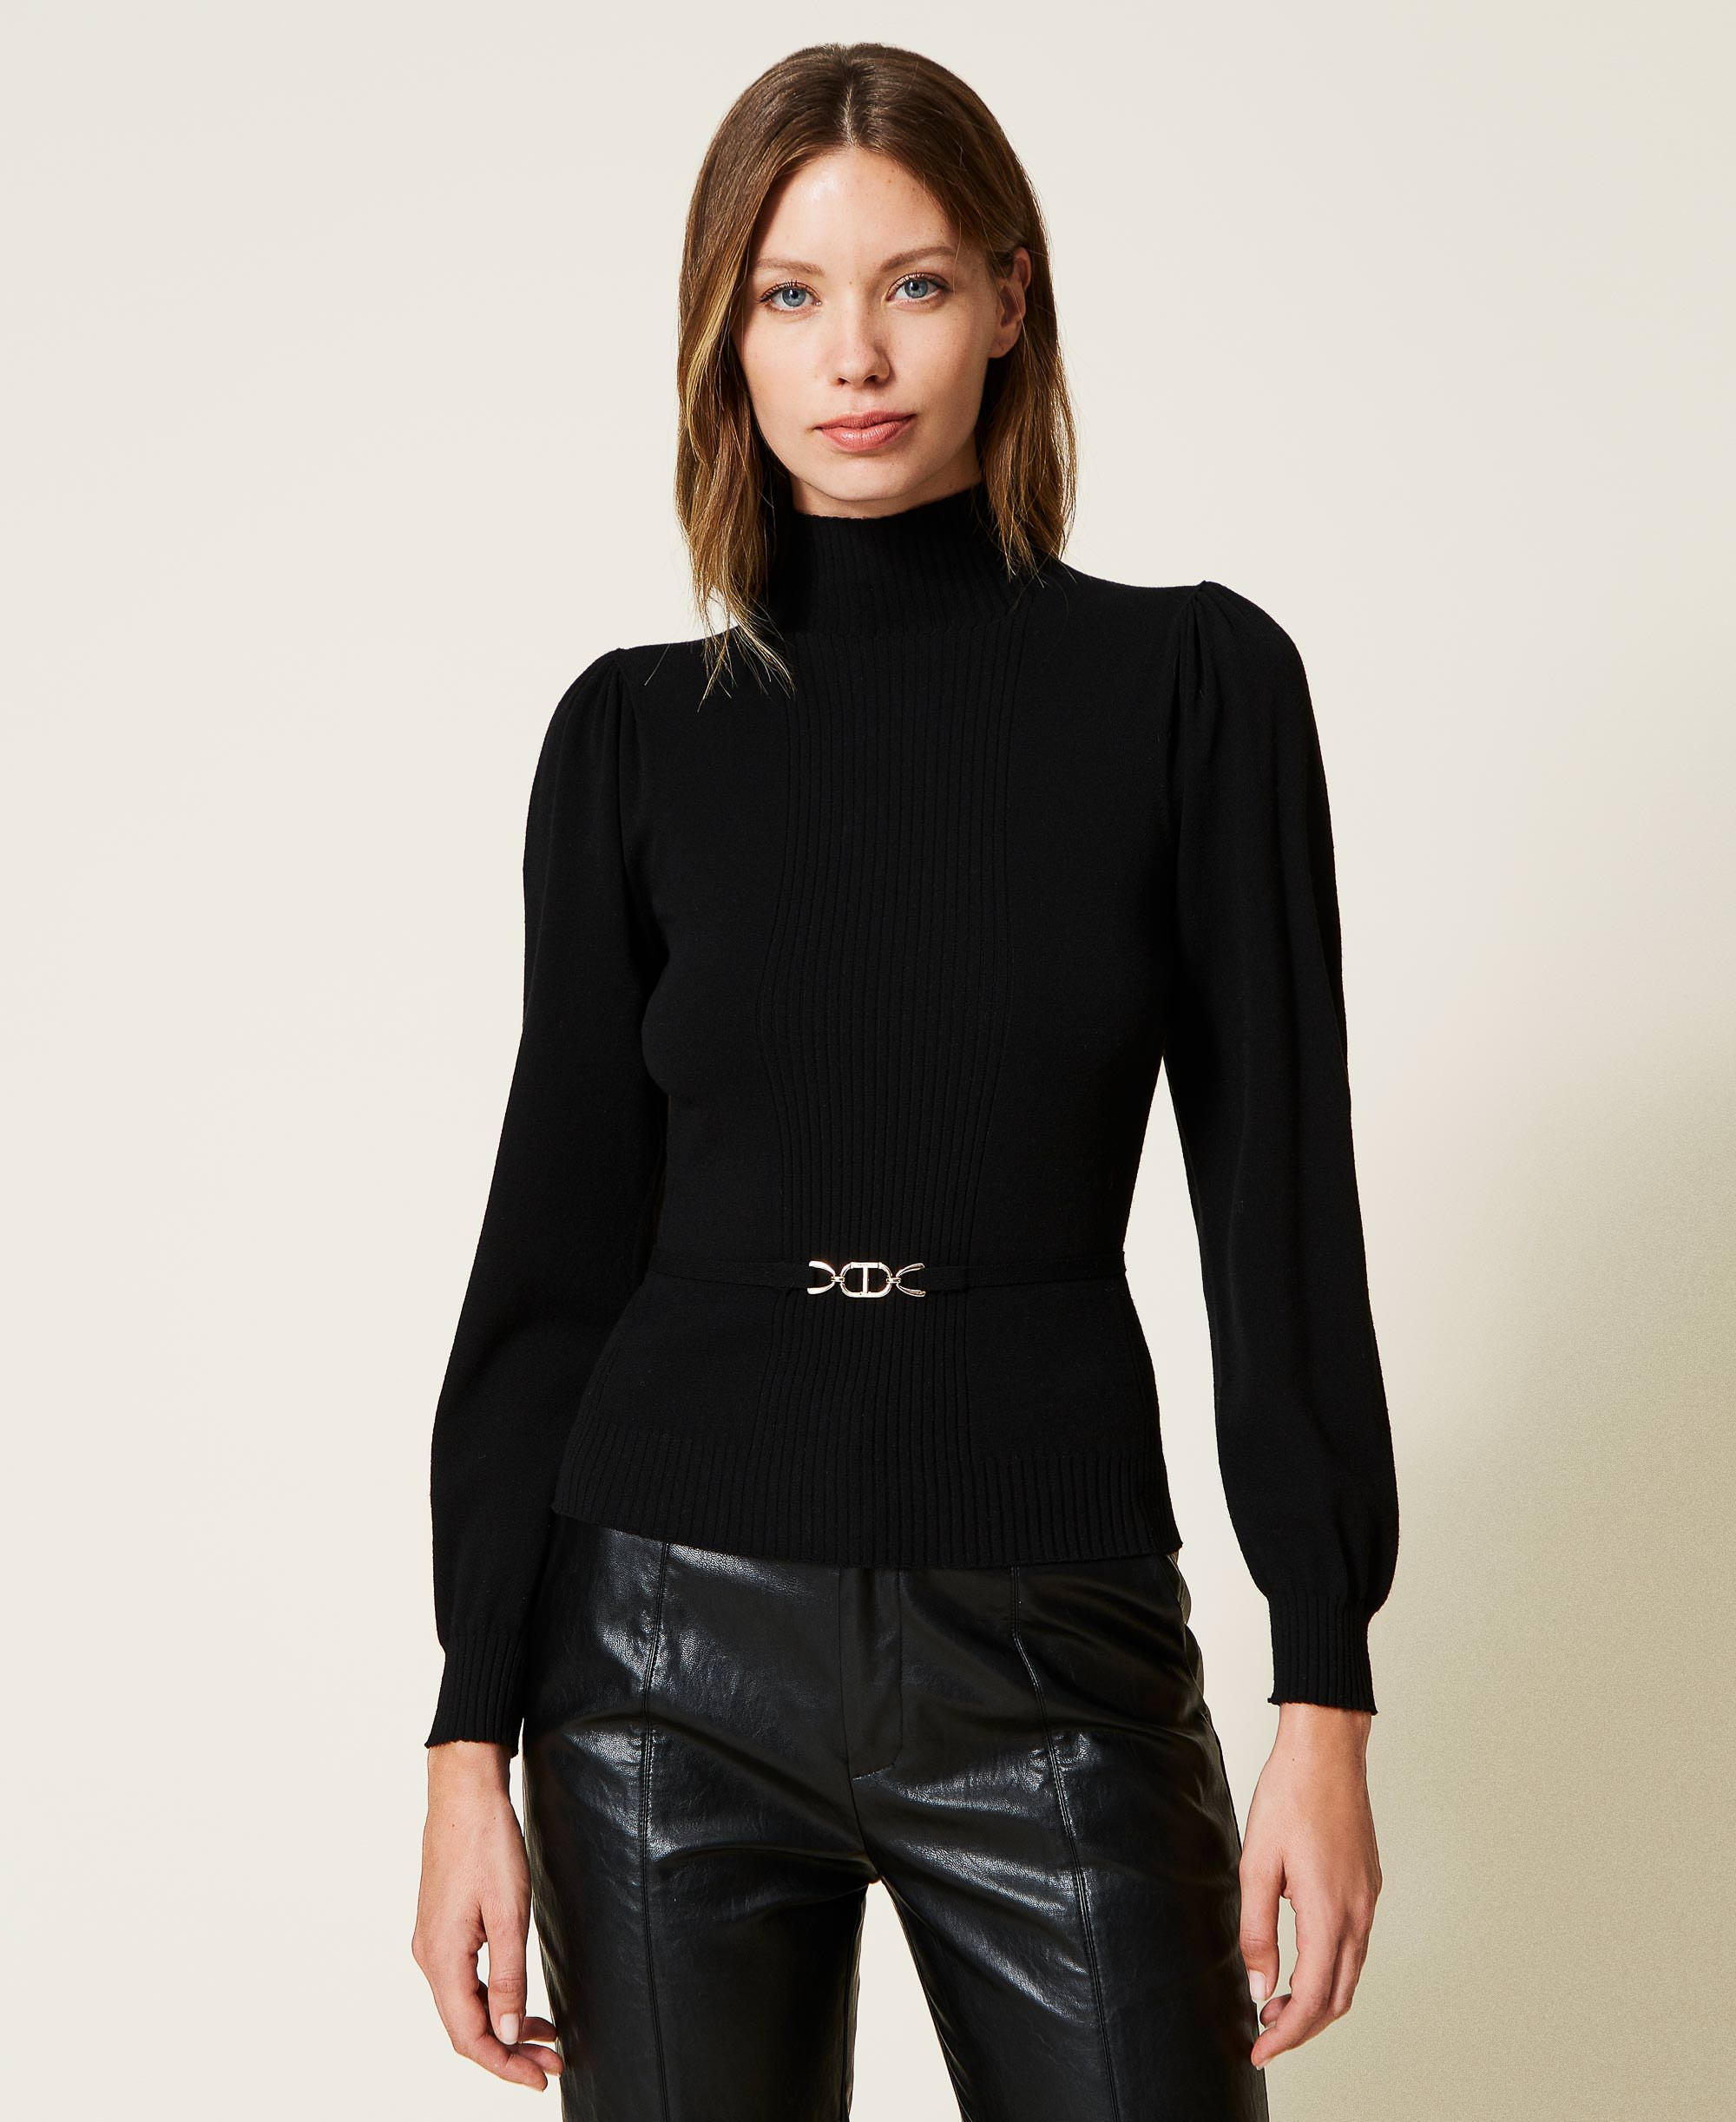 Seamless jumper with Oval t clasp